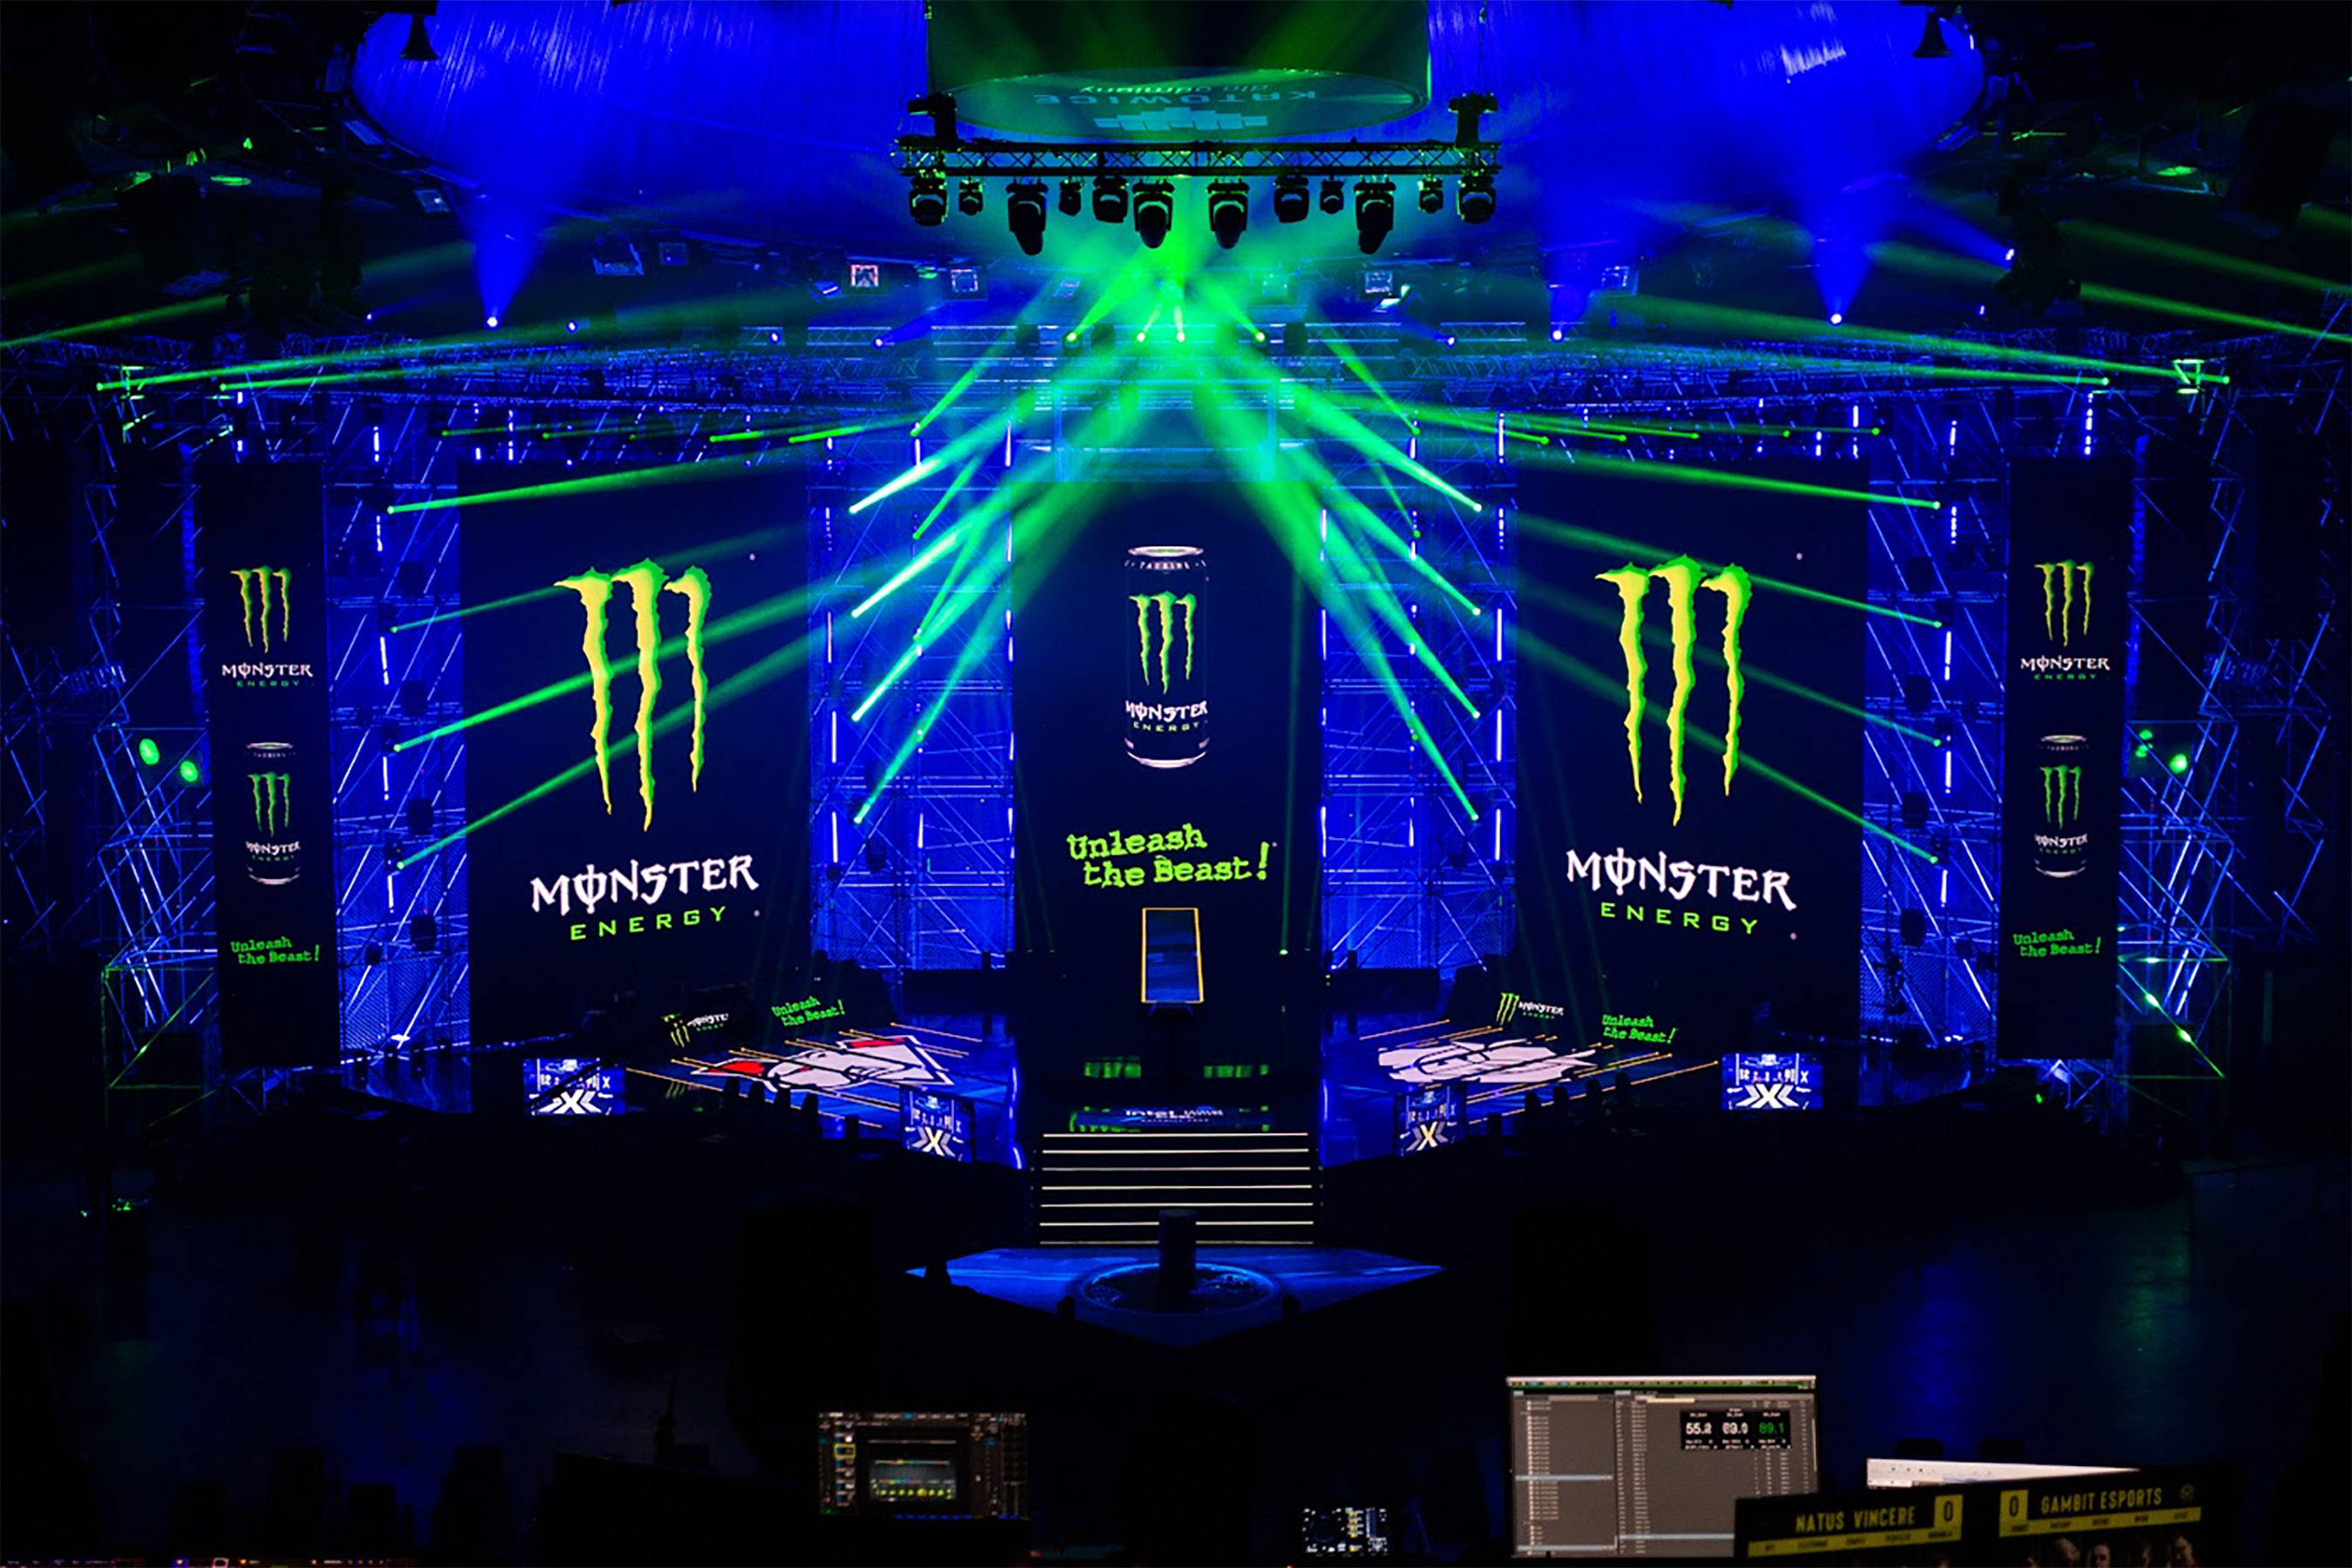 Monster Energy takes over the stage at IEM Katowice 2022 during the Counter-Strike: Global Offensive Quarterfinals.